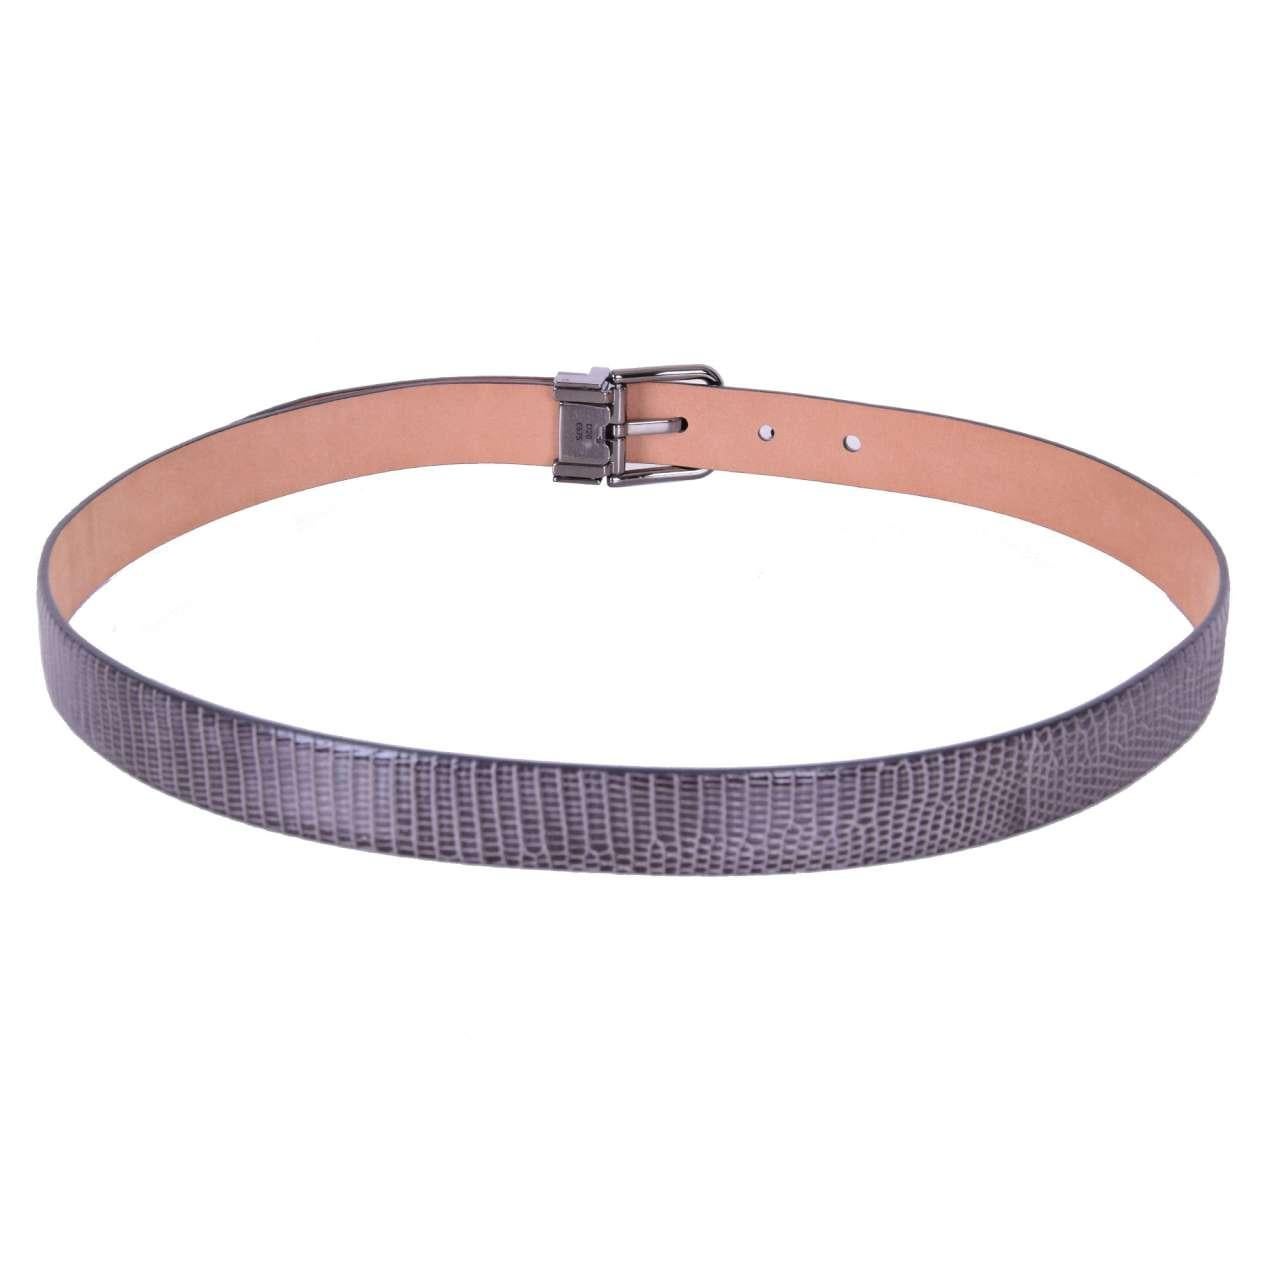 - Lizard belt with removable roller buckle in gray by DOLCE & GABBANA Black Label - MADE IN ITALY - New with Dustbag - Model: BC3614-A2002-80720 - Material: 100% Lizard - Width: 2,5 cm - Color: Gray - Roller buckle with ruthenium finished - Square